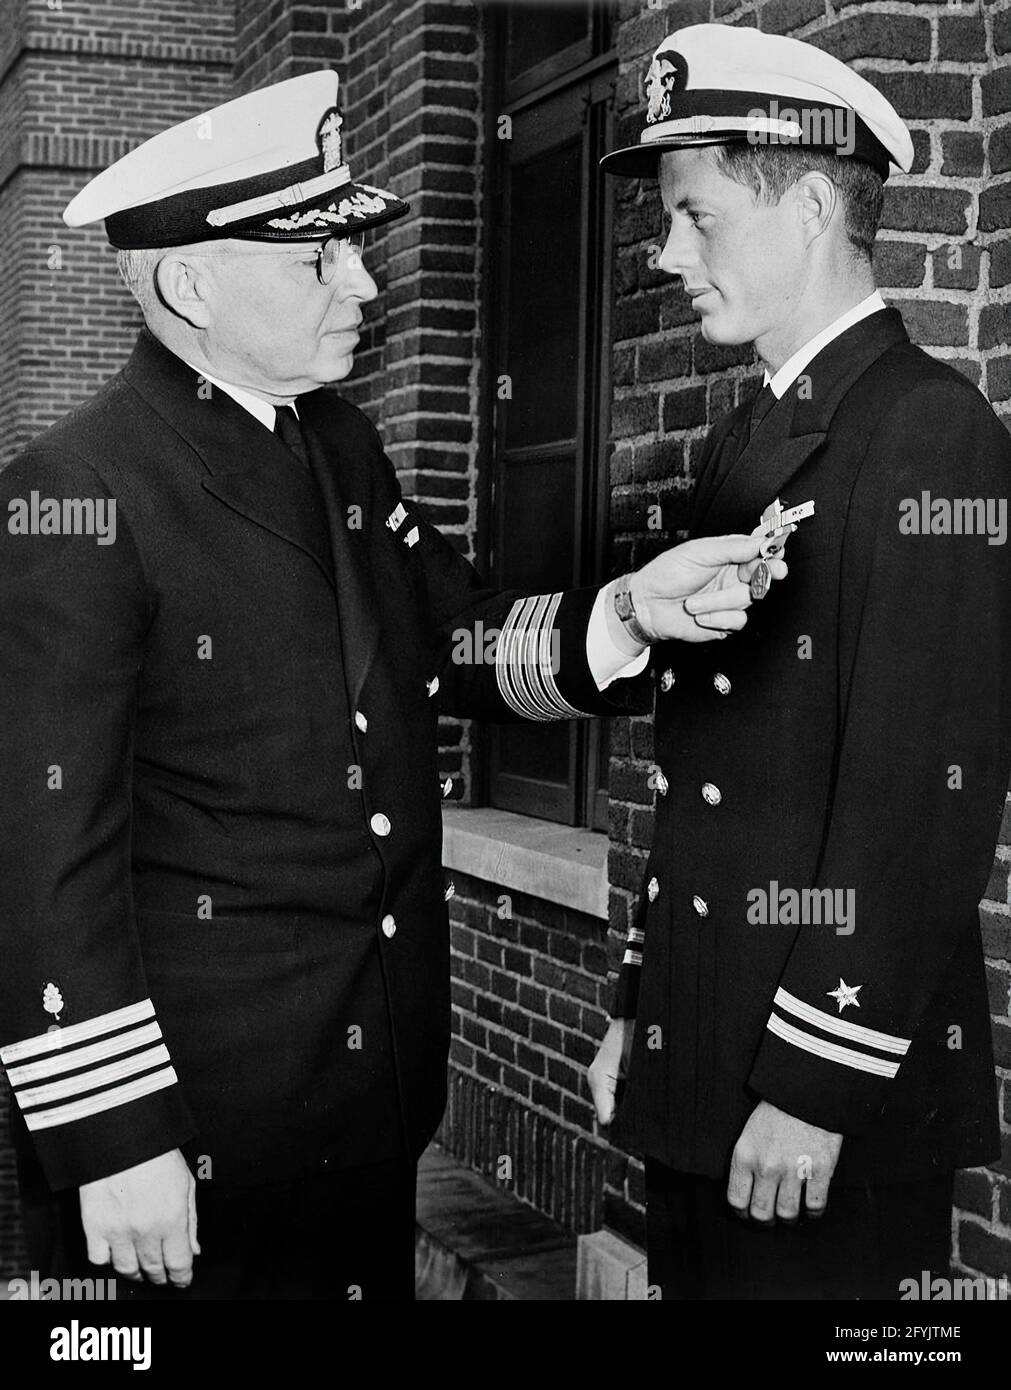 Lieutenant John F. Kennedy being awarded the Navy and Marine Corps Medal for heroism in rescuing members of the crew of the PT-109; original photograph taken 11 June 1944. Captain Frederick L. Conklin, Commandant of Chelsea Naval Hospital; John F. Kennedy. Chelsea Naval Hospital, Chelsea, Massachusetts. Stock Photo